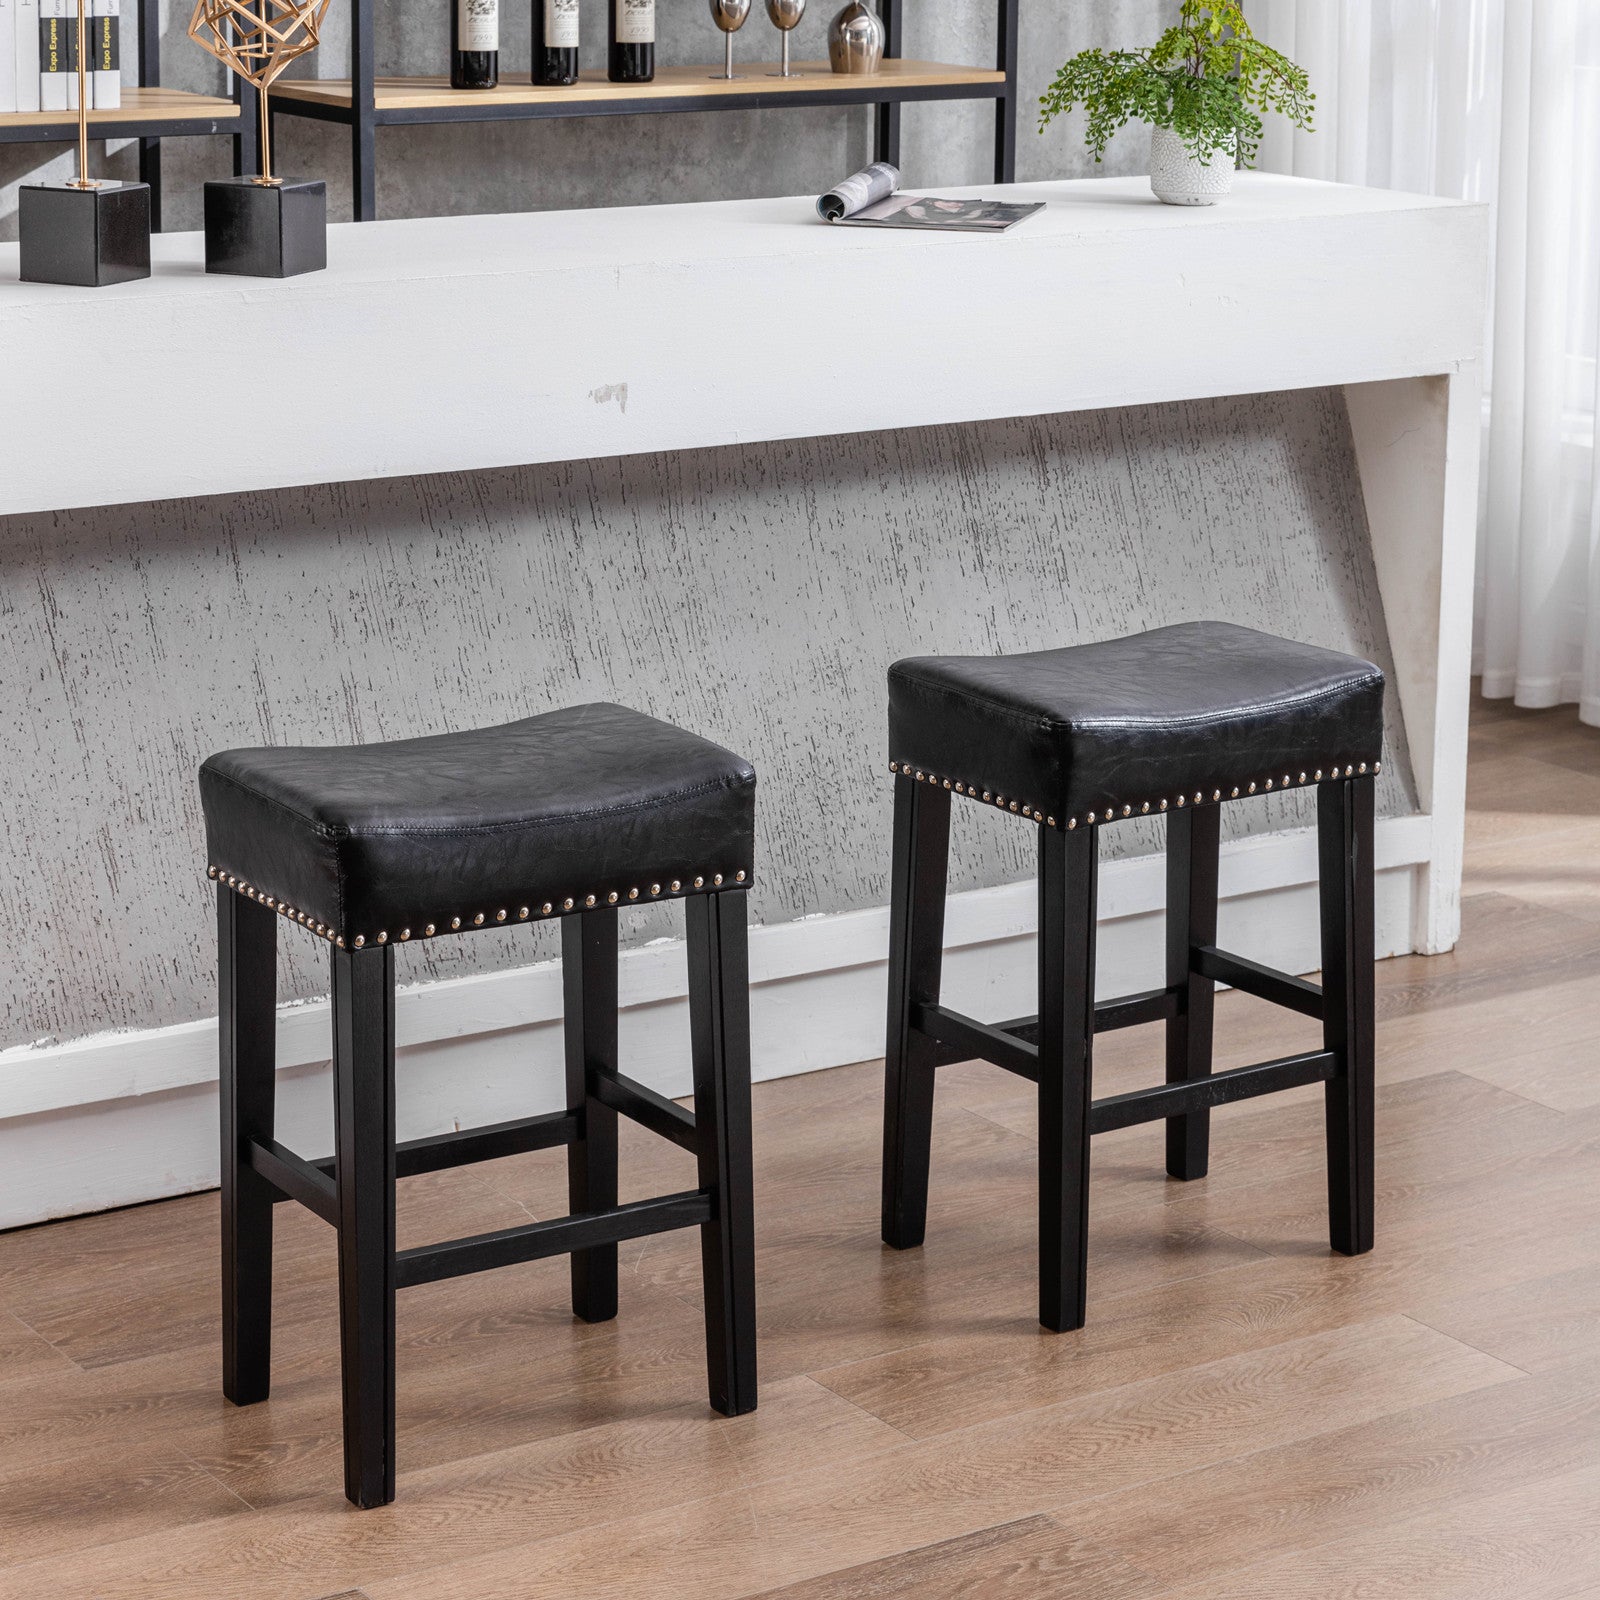 26" Set of 2 Black Faux Leather Counter Stools with Wood Legs